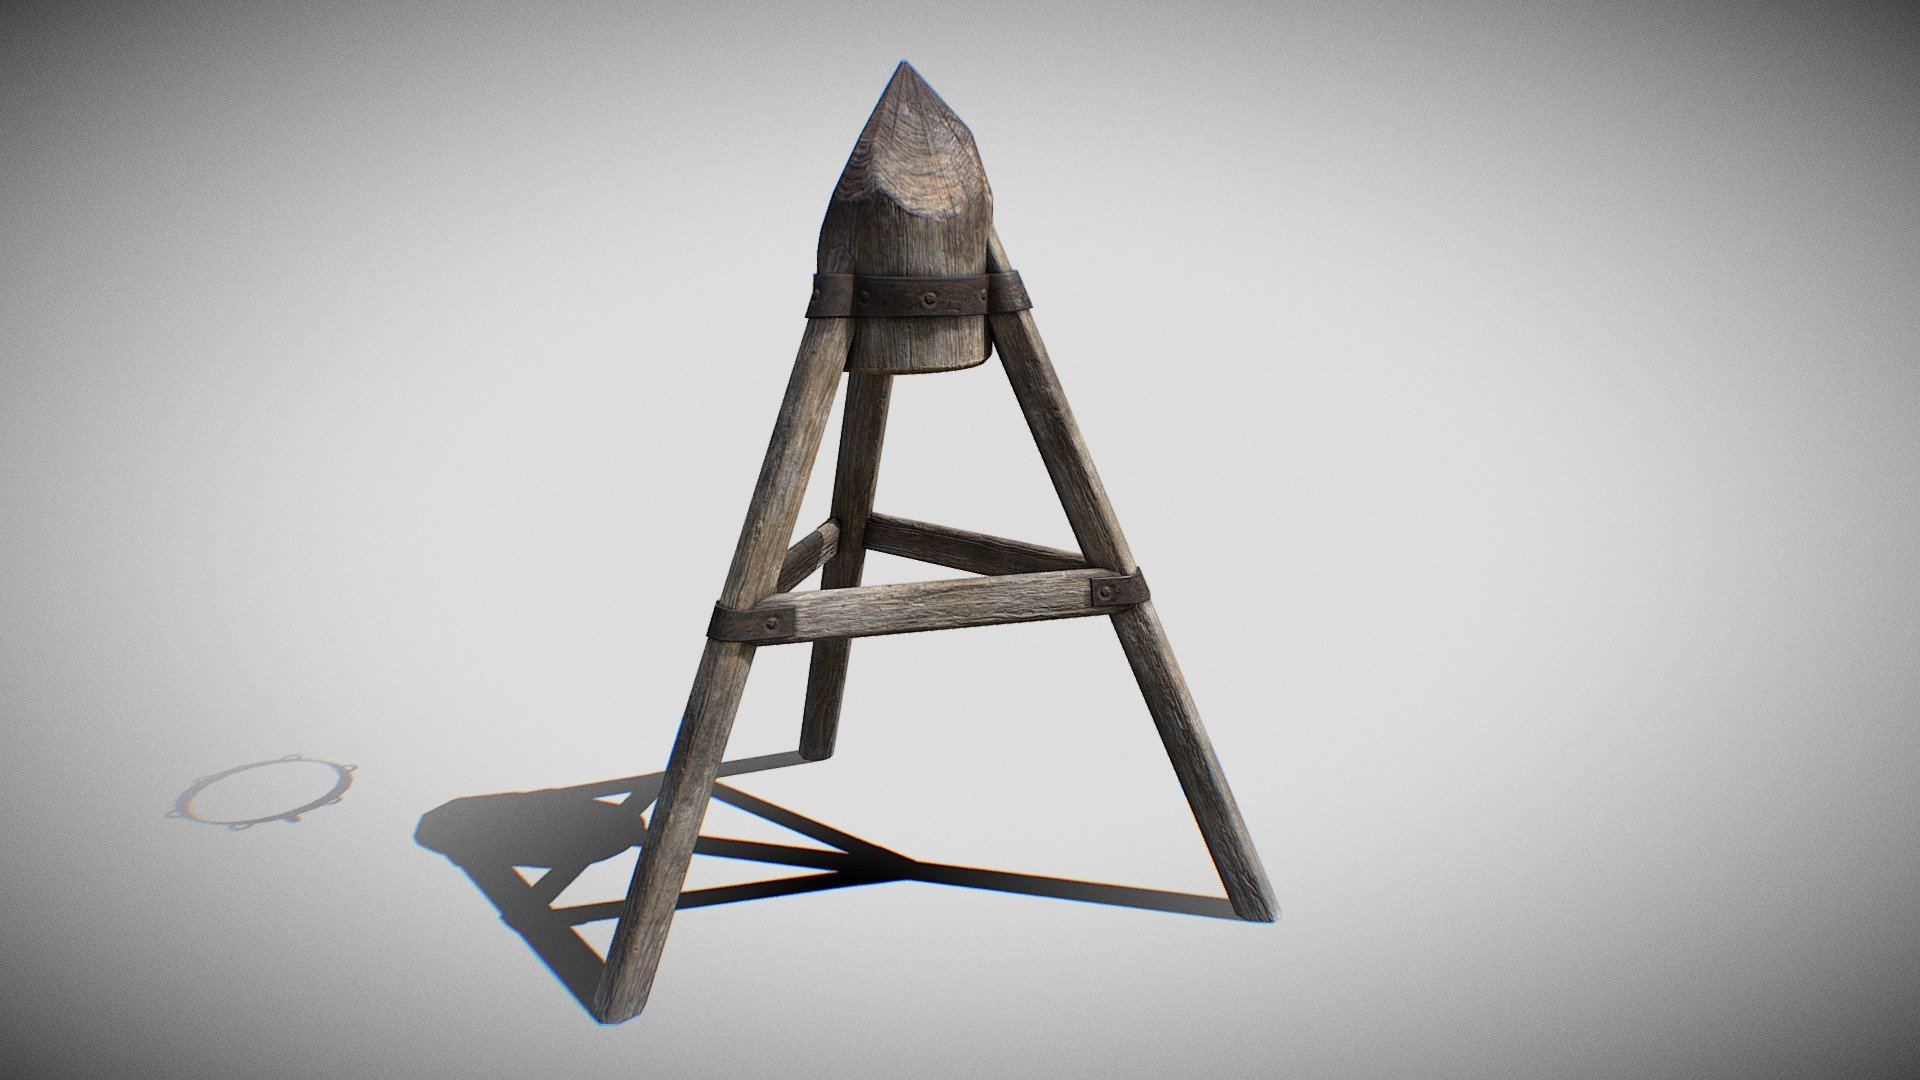 Low-poly PBR Judas Cradle model intended for game/realtime/background use.






Model was not intended for subdivision

Real World Scale Measurements

No special plug-ins necessary to use this product 

Tris count- 1876 polygons

Texel density is 25.46 for 4k UV-maps.

model height 1.41 meters



Model is included in 6 file formats:




Maya 2019

FBX 

OBJ 

GLTF/GLB 2k and 4k file

Unreal Engine 4.25+ (LOD, Colision)

Unity 2020.3 (Collider)



High quality 4096x4096resolution textures in PNG:





PBR Maps:
BaseColor, 
AO, 
Roughness, 
Metalness, 
Normal, 
Glossiness, 
Specular. 




Unity maps (+HDRP maps):
Diffuse, 
Normal map, 
MetallicSmoothness,
HDRP mask map.




Unreal Engine 4 maps:
BaseColor, 
Normal, 
OcclusionRoughnessMetallic.


 - Judas Cradle - Buy Royalty Free 3D model by en3my71 3d model